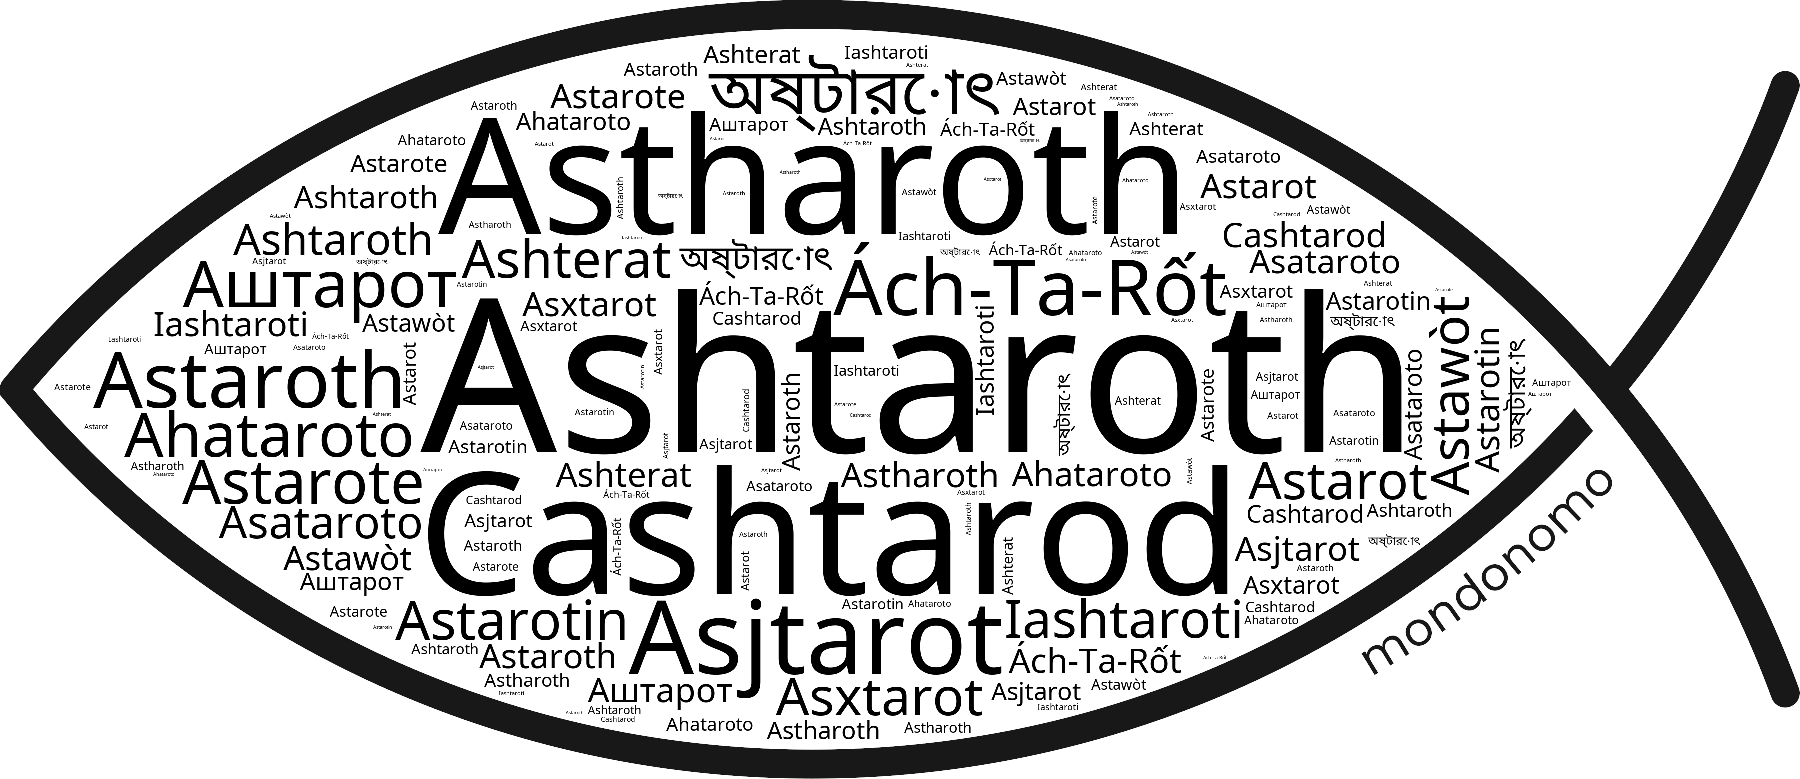 Name Ashtaroth in the world's Bibles